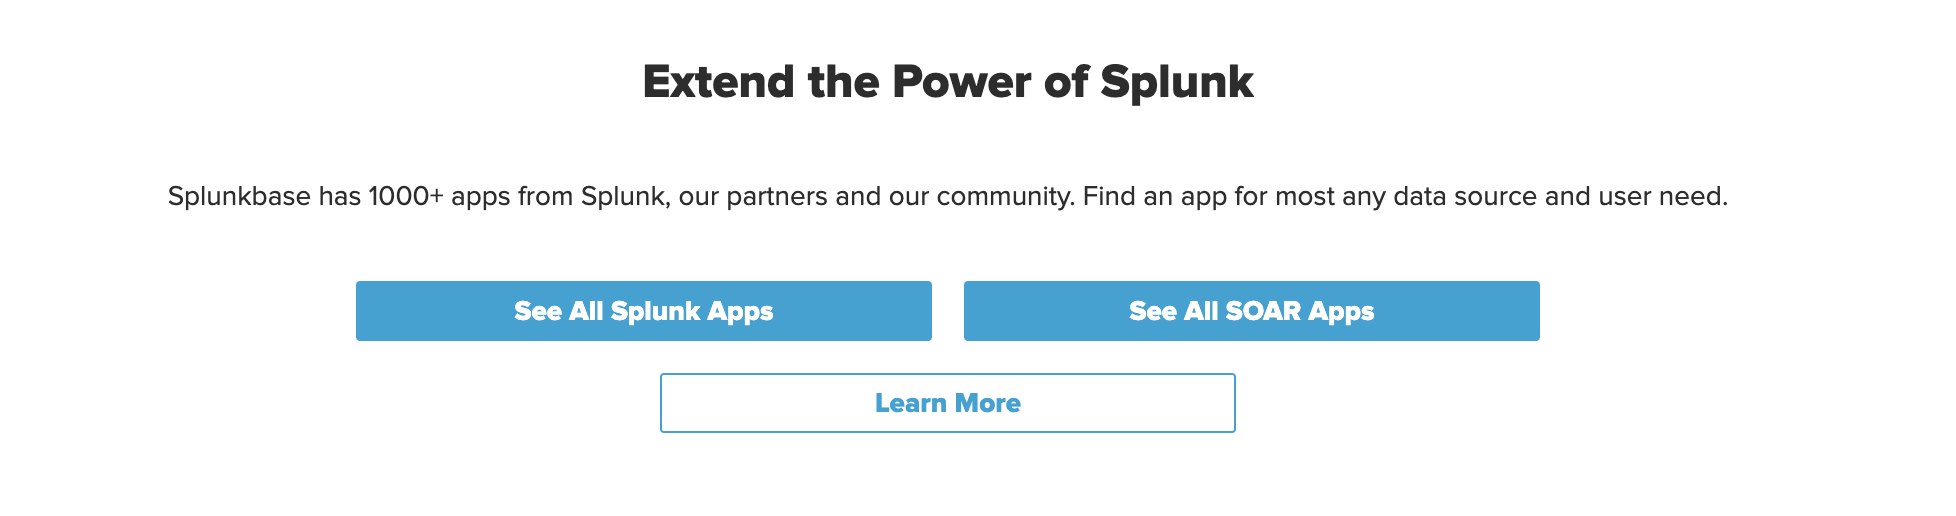 Extend the Power of Splunk